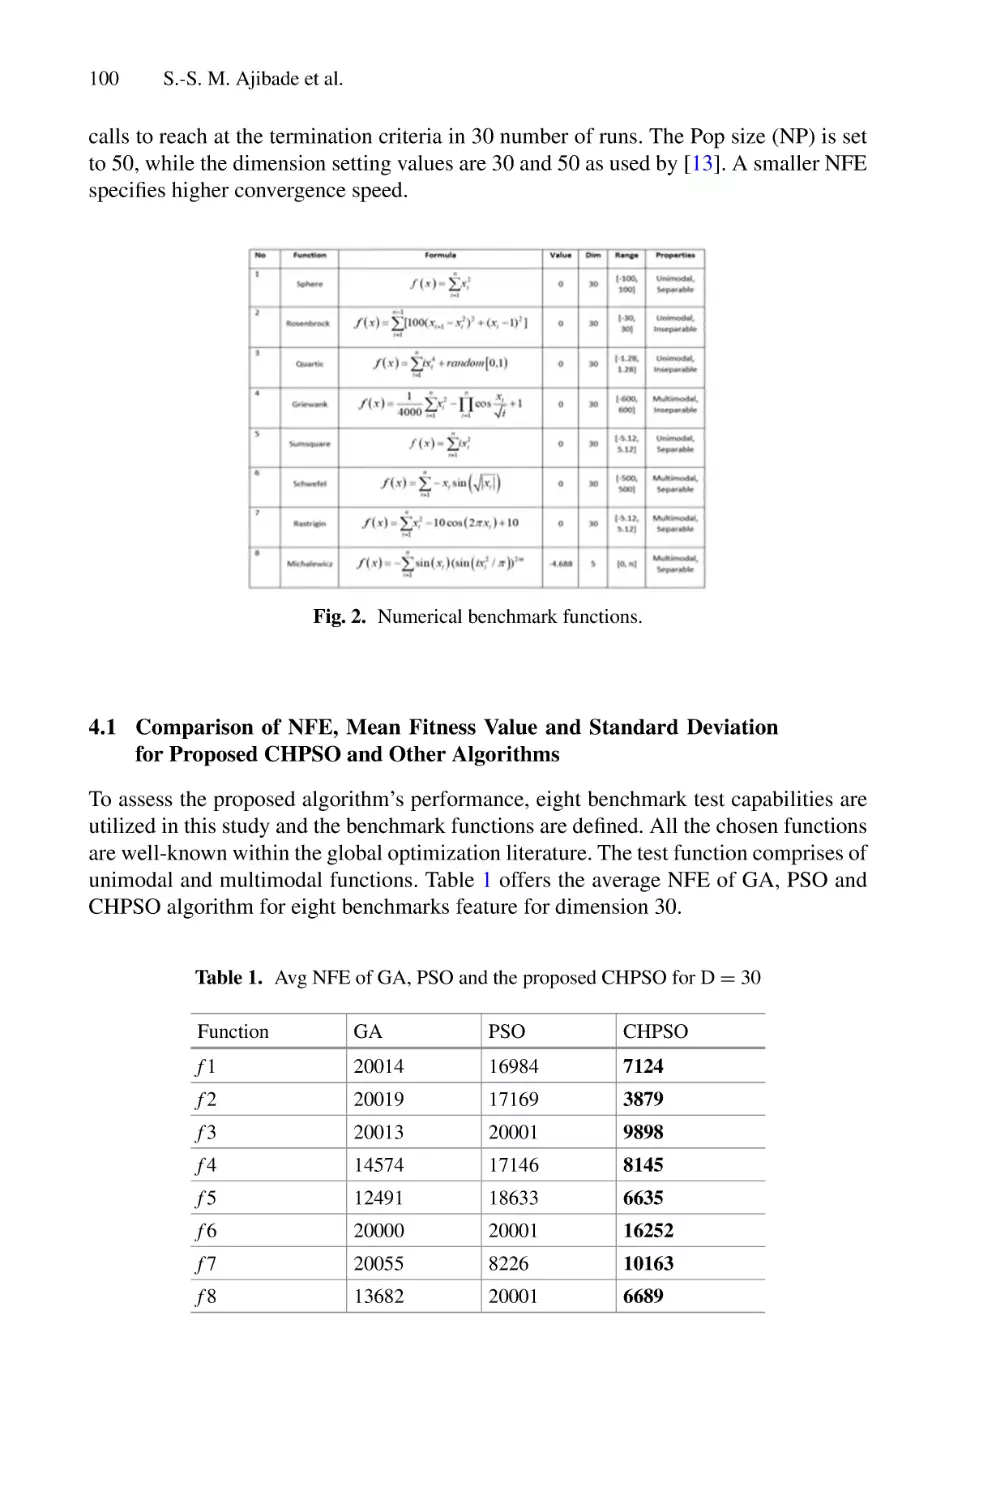 4.1 Comparison of NFE, Mean Fitness Value and Standard Deviation for Proposed CHPSO and Other Algorithms